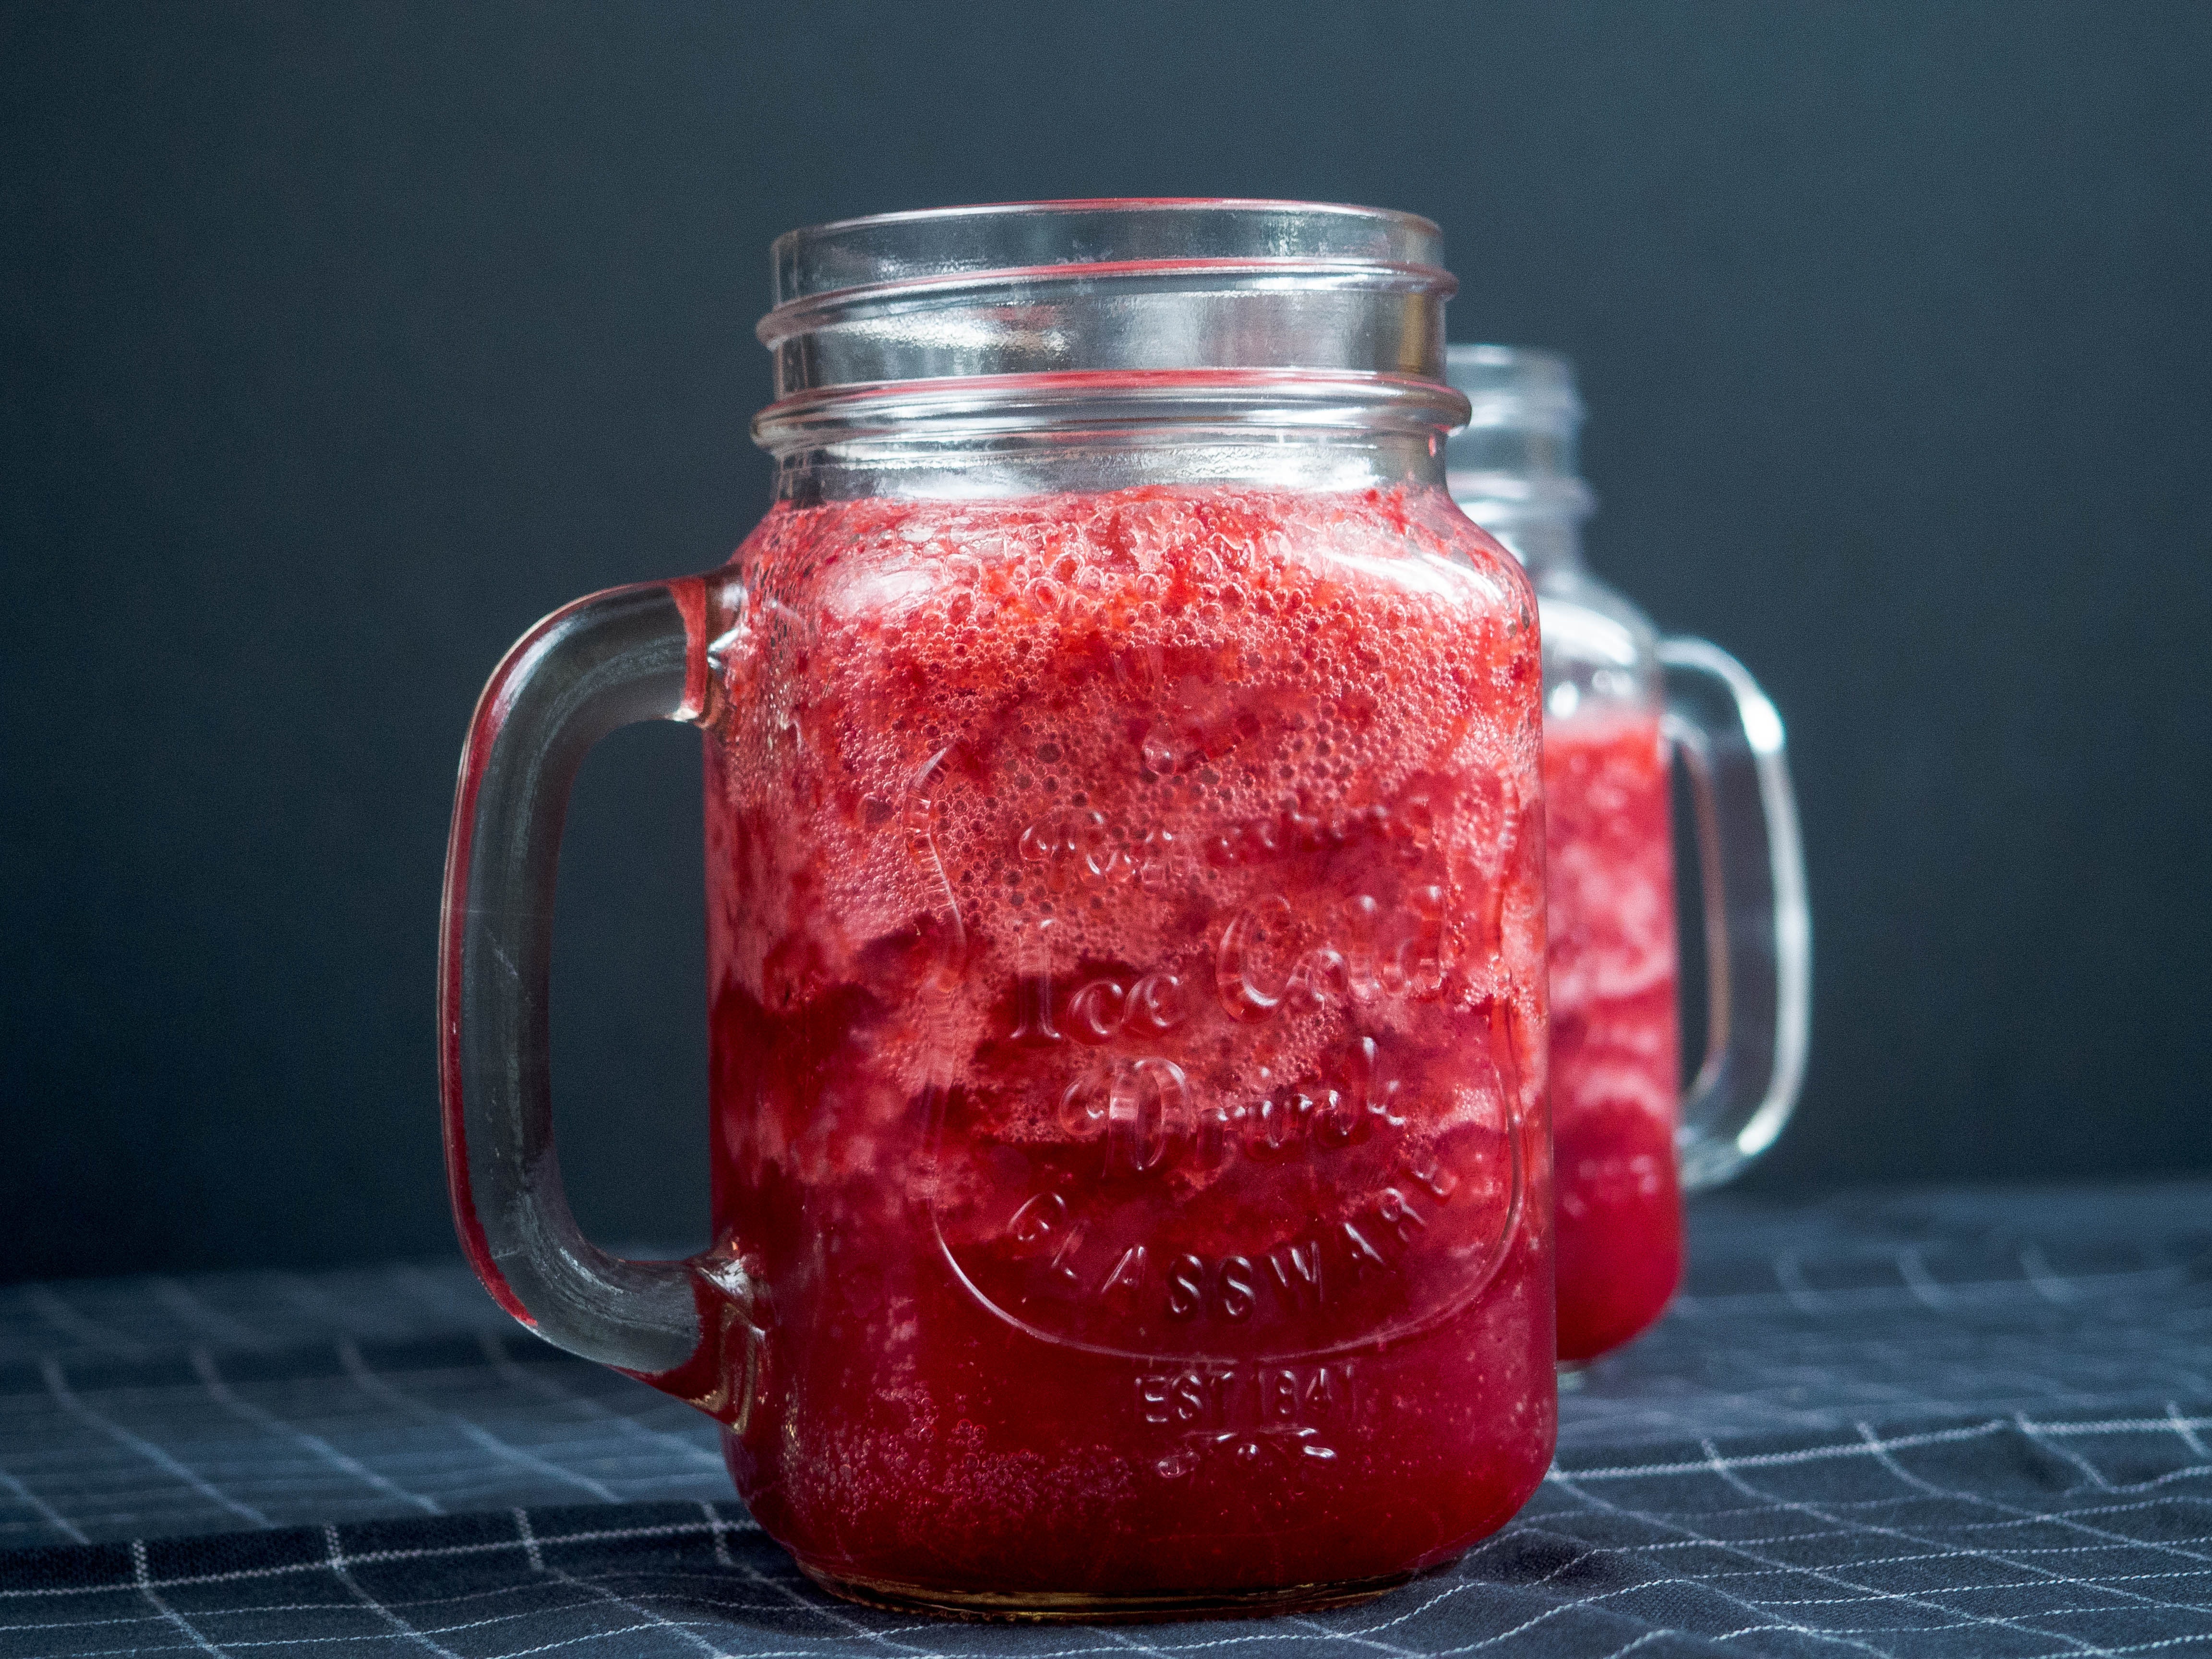 Closeup Photography of Two Clear Glass Jar Filled With Red Liquid on Top of Blue and White Tattersal Textile, Background, Mason jar, Healthy, Homemade, HQ Photo